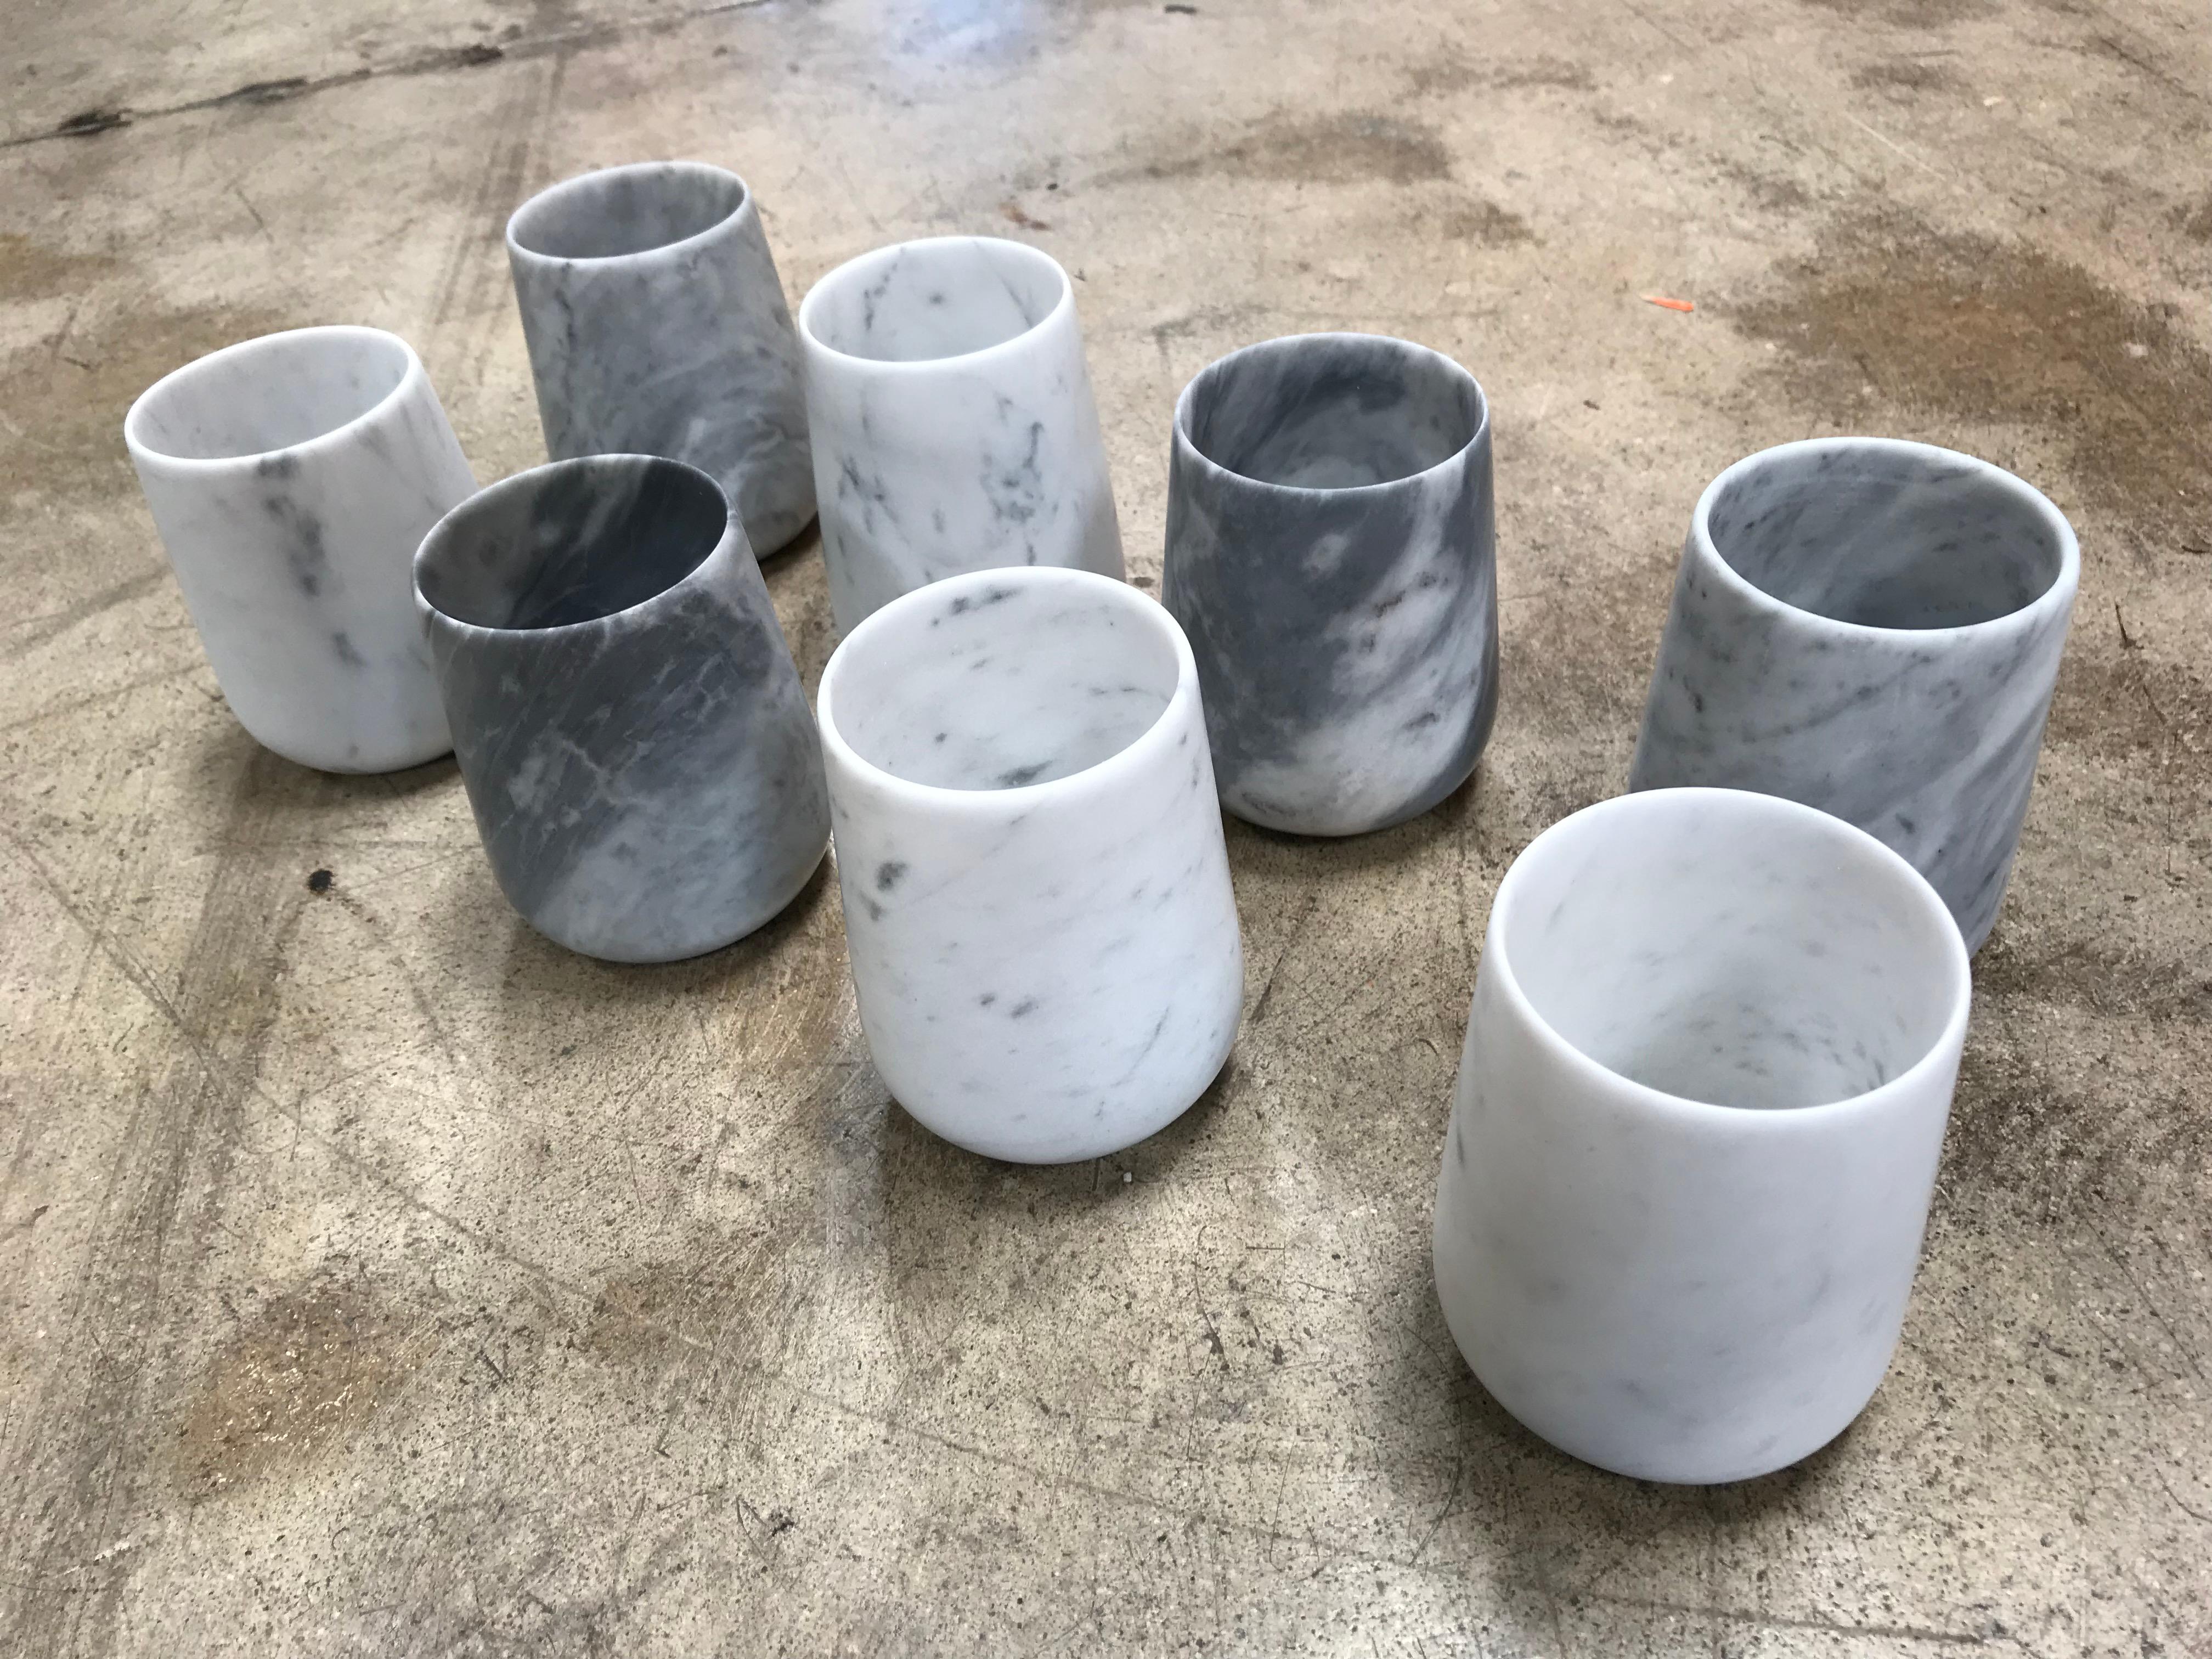 Set of 8 Carrara marble glasses, Italy
Every single item is unique and different from the other.
Italian prestigious Carrara marble.